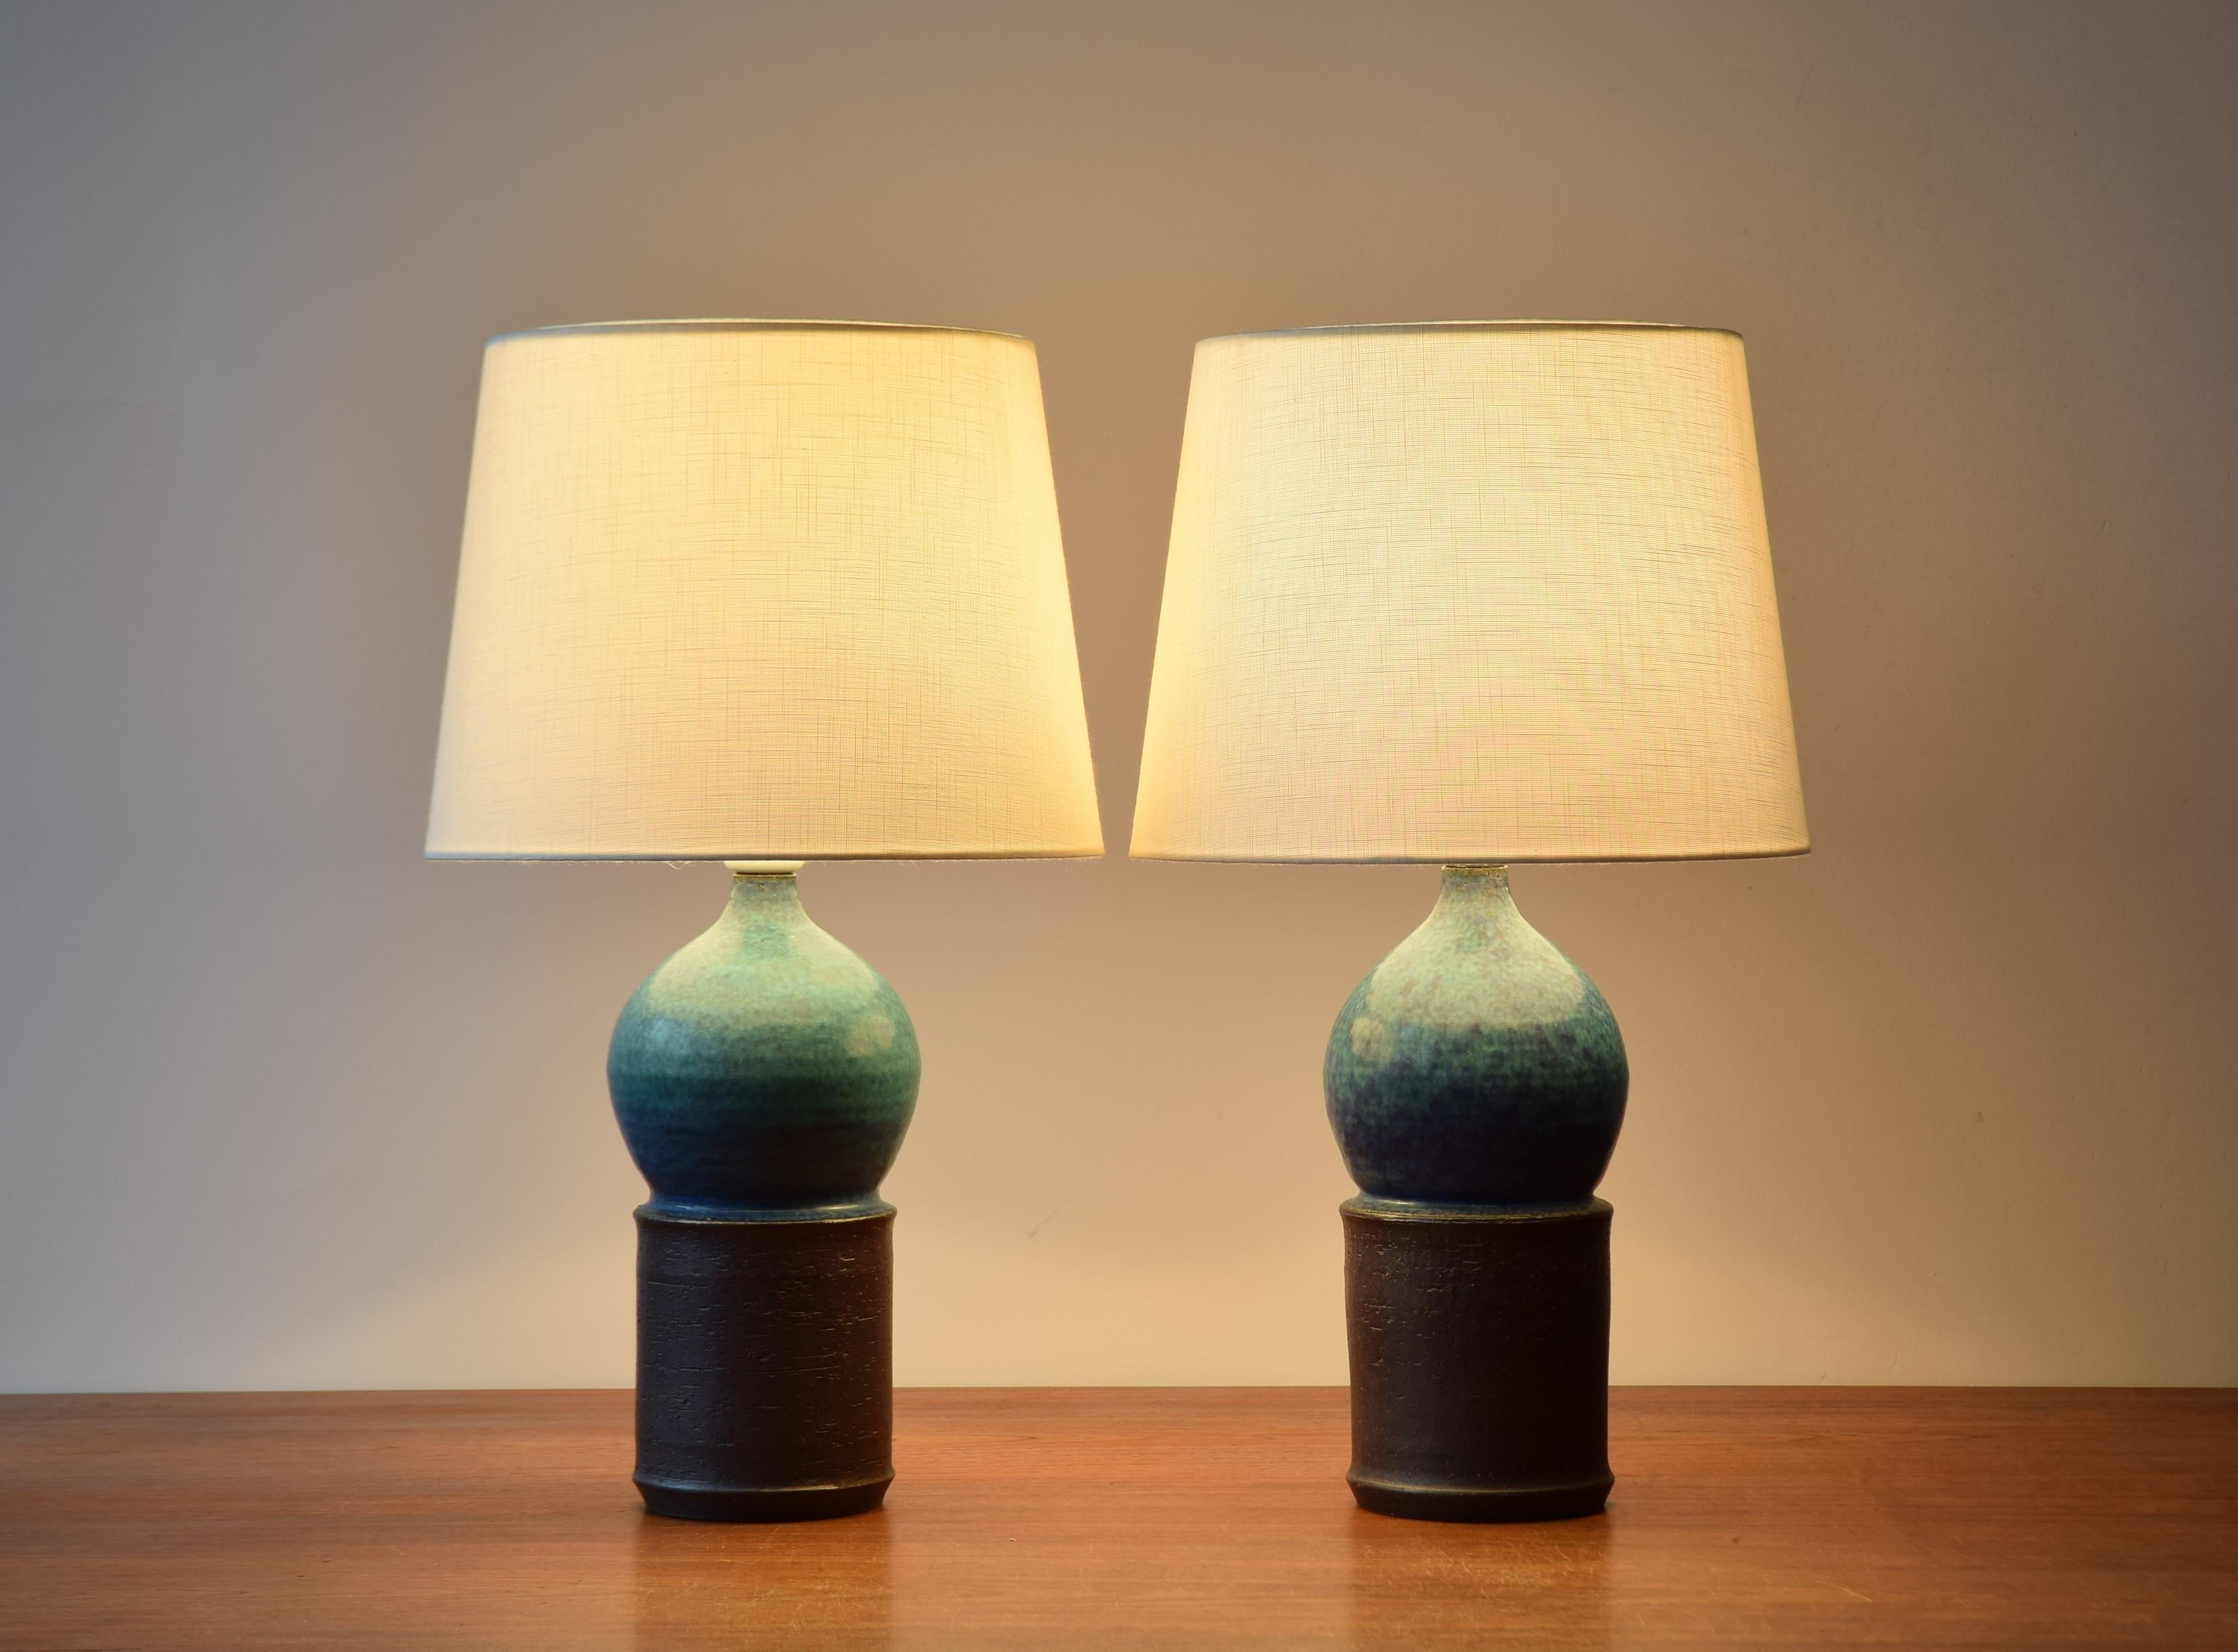 Pair of Danish midcentury sculptural table lamps by Marianne Starck for Michael Andersen & Søn made of turquoise blue glaze and dark brown clay.
Made circa 1960s. 

Included are new lampshades designed in Denmark. They are made of woven fabric